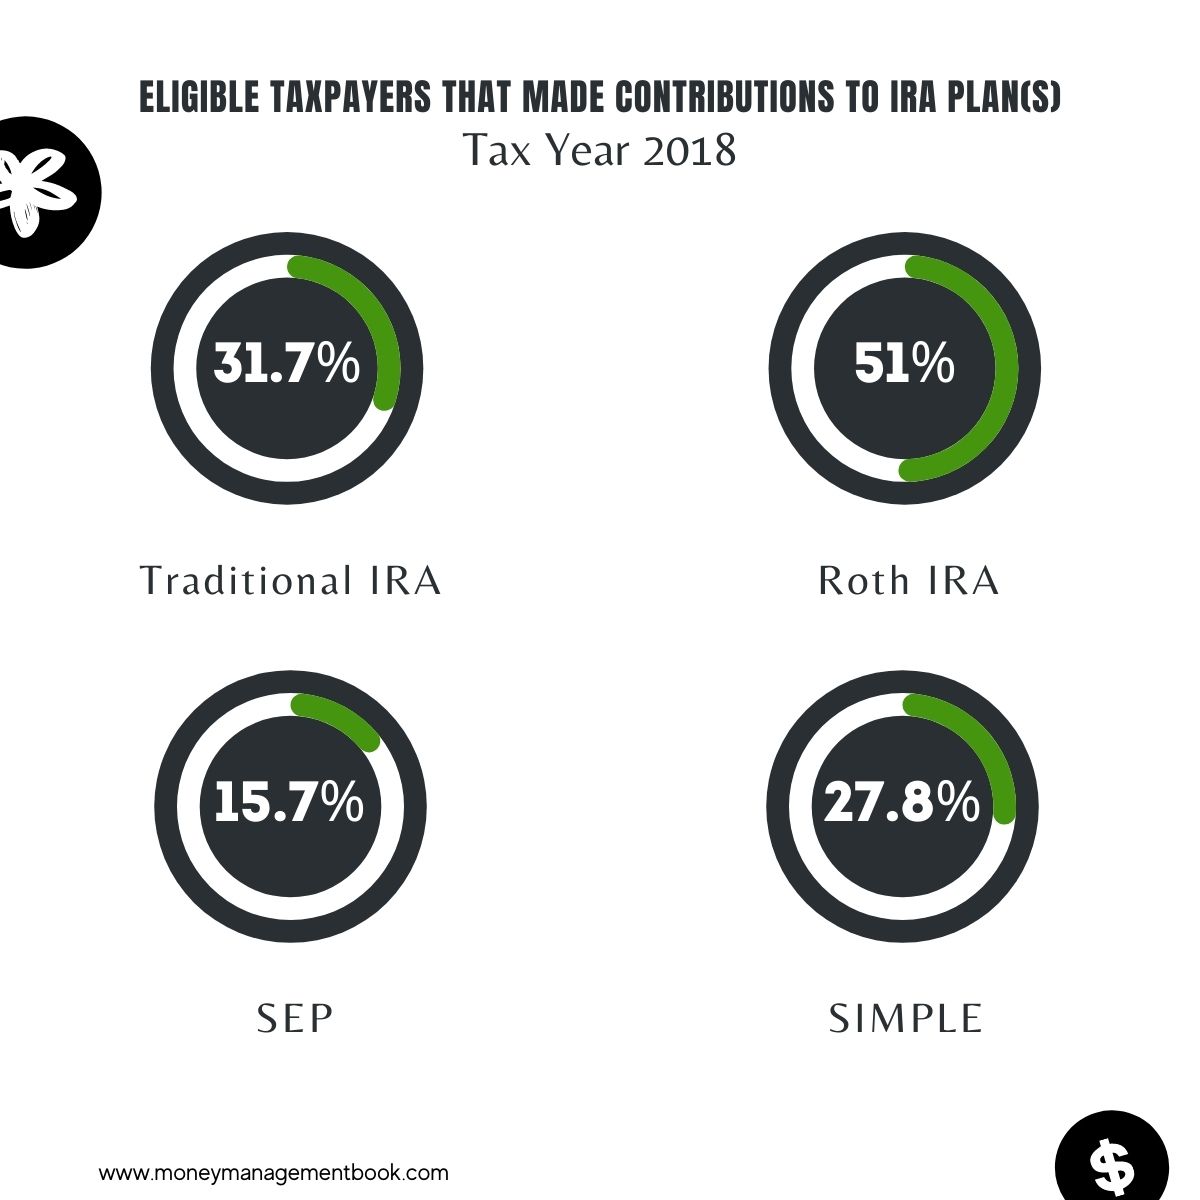 IRA Plan Contributions by Plan Type